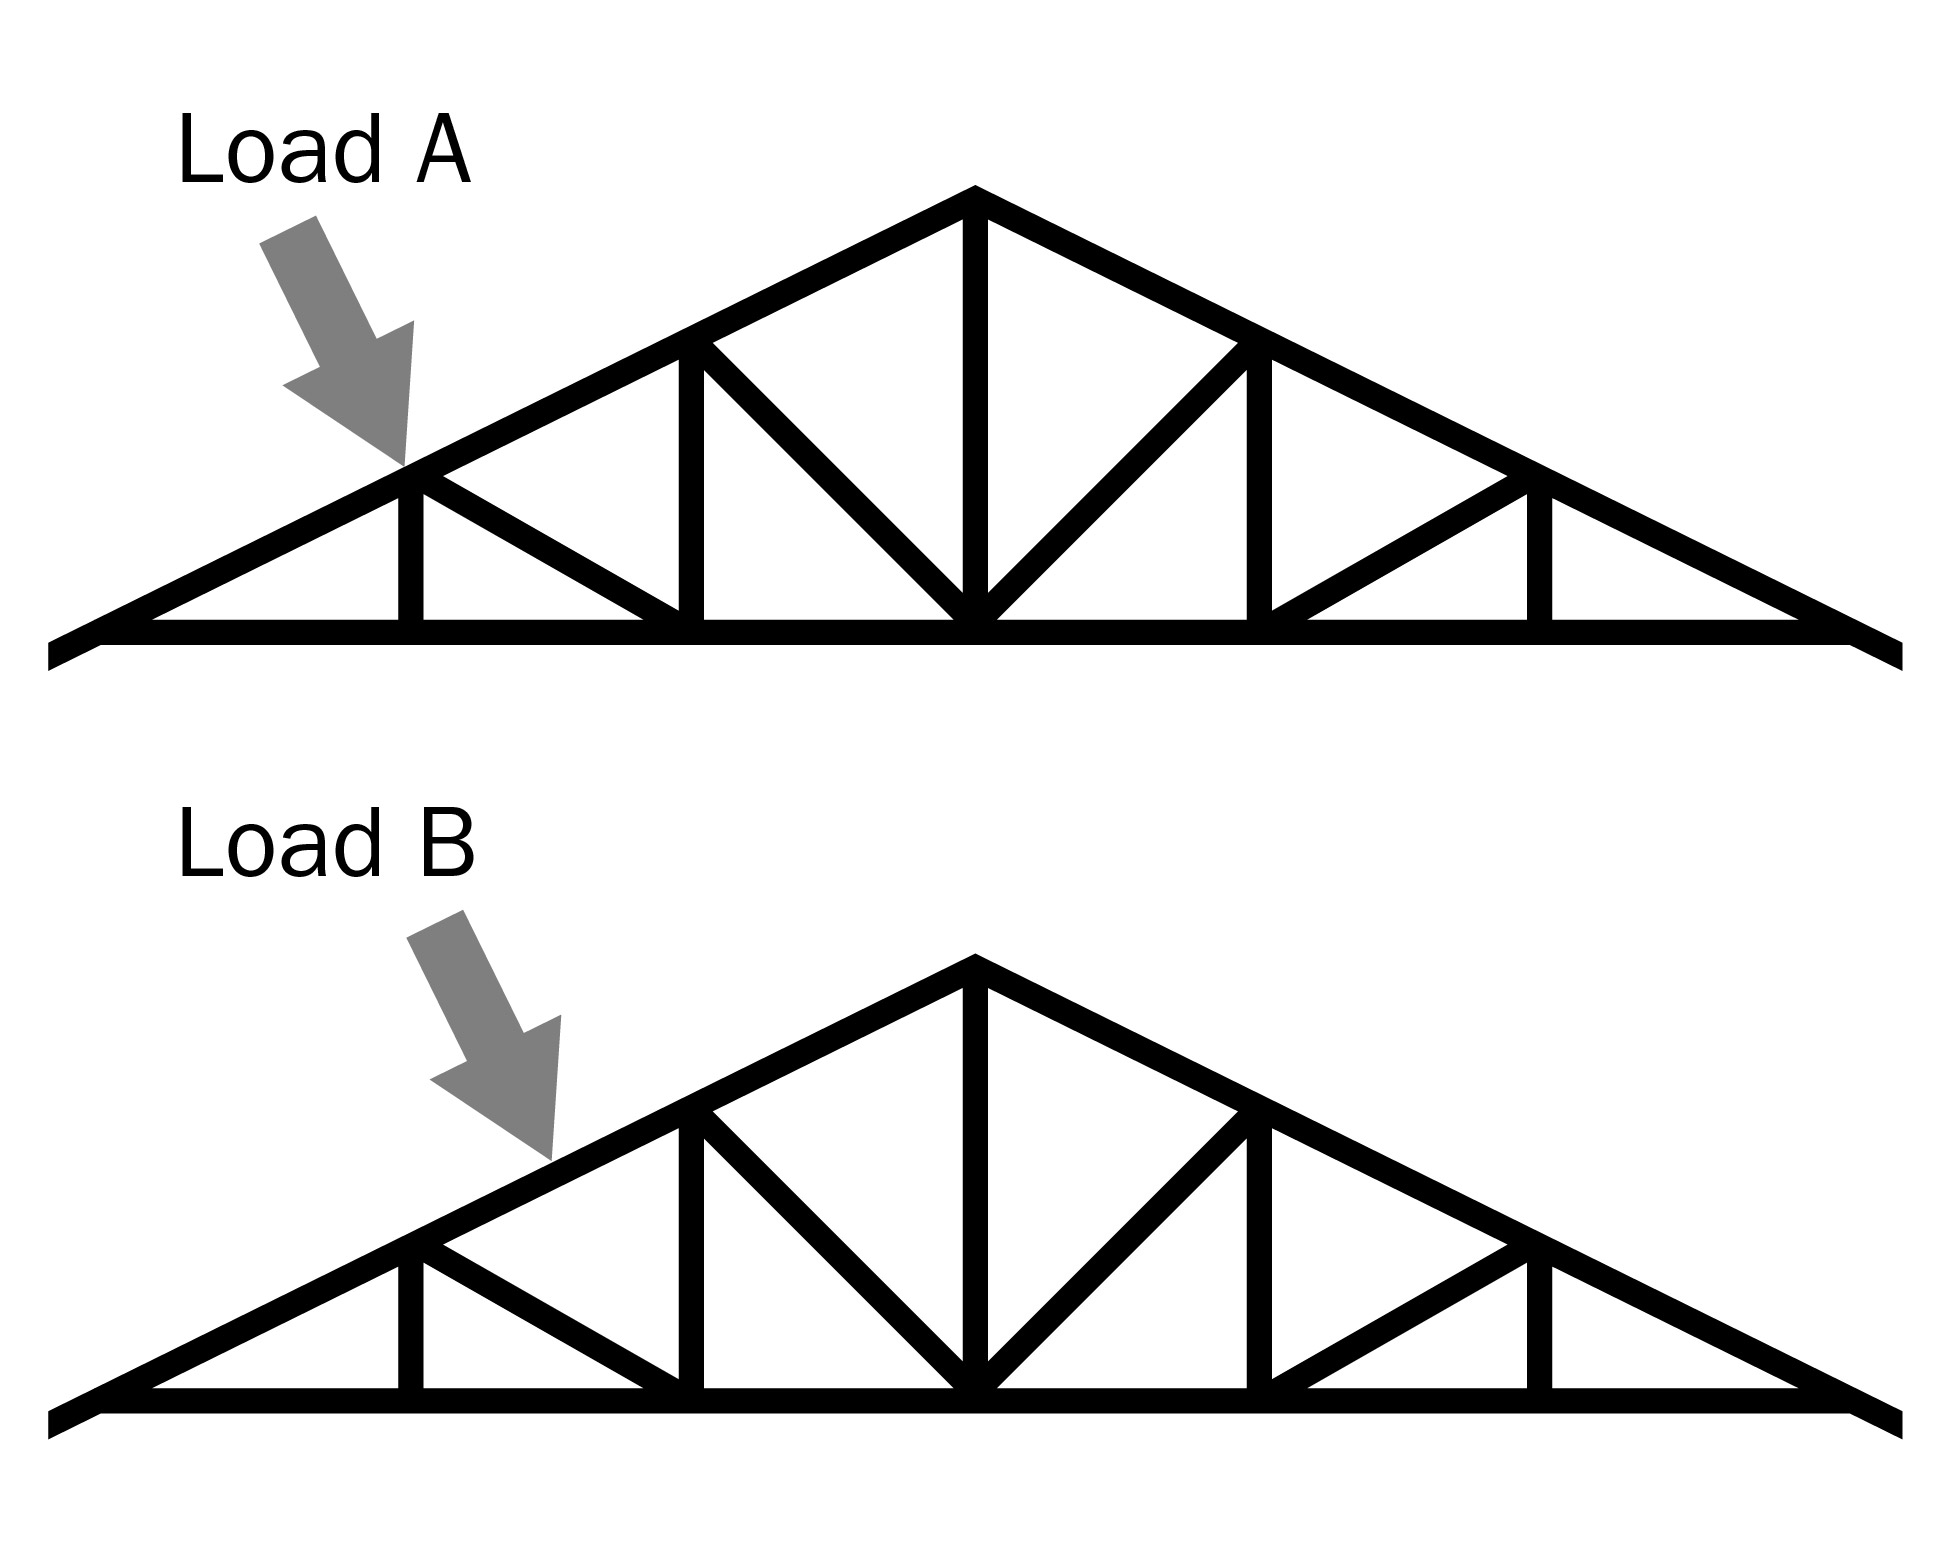 The location of the solar installation that is connected to the truss impacts the force that the truss needs to withstand. At location A (union of two webs), the top chord is well supported by the two webs but will experience more bending force if the same load is applied further up the truss at location B (in between webs)